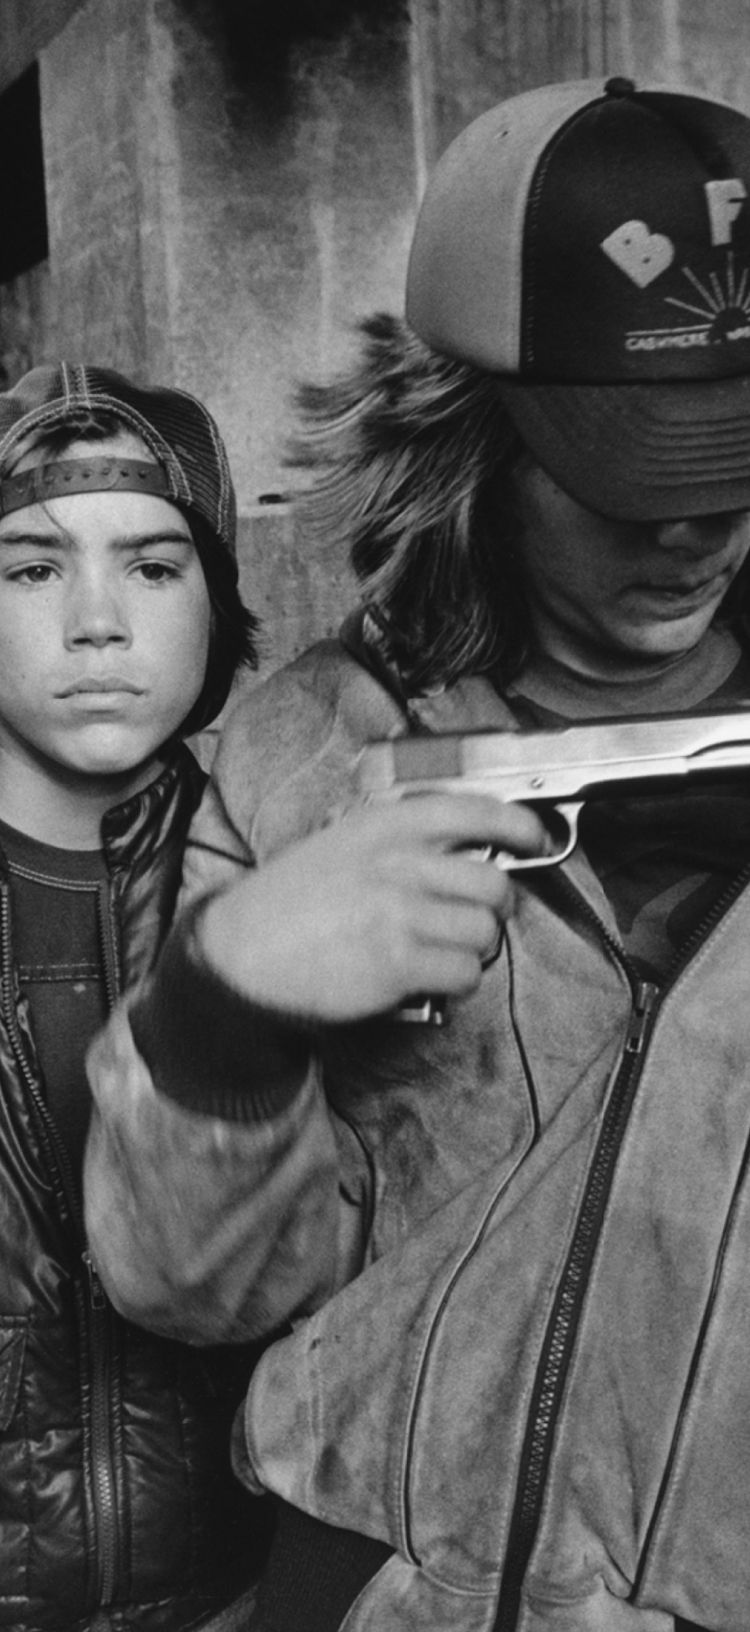 The Greats: How Mary Ellen Mark Captured the Marginalised with Compassion